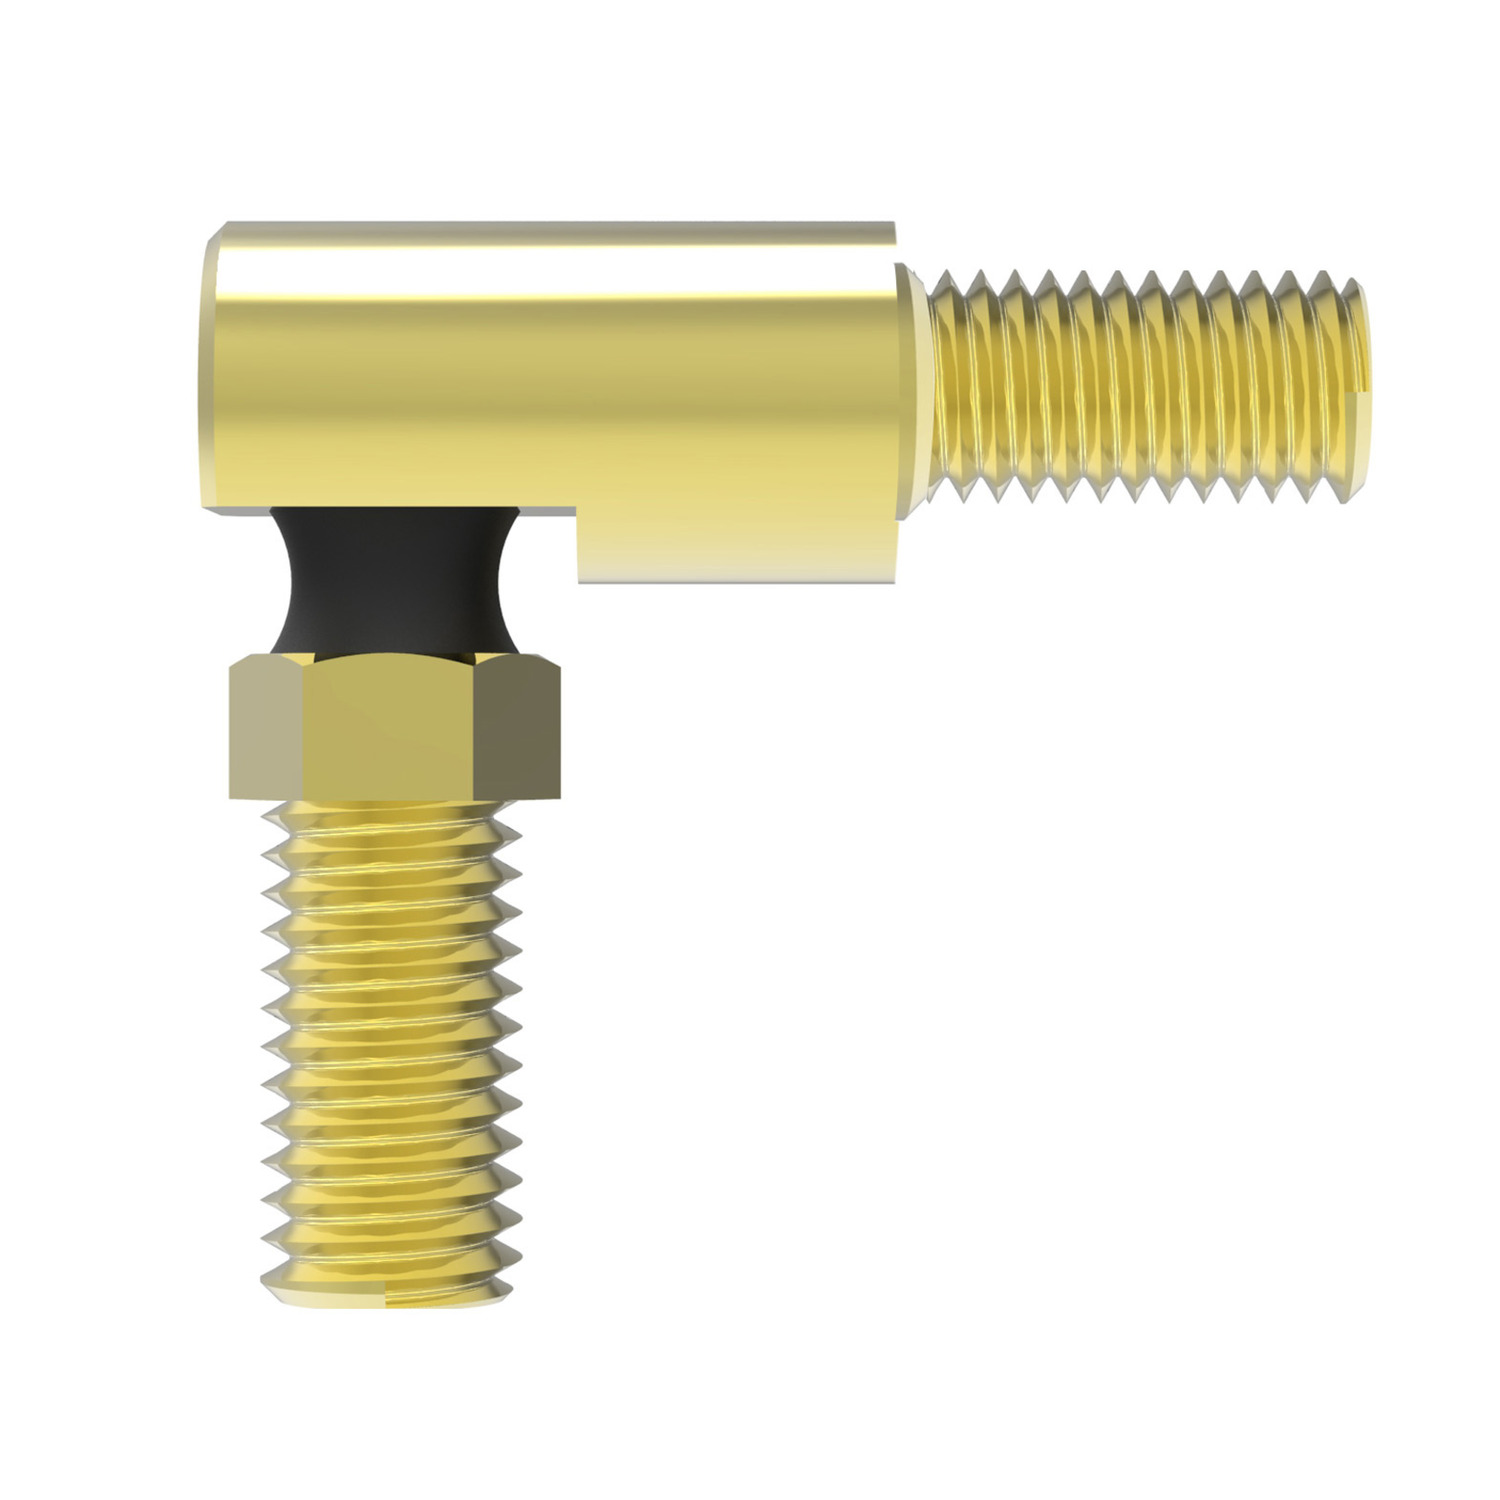 Product R3539, Male DMG Ball and Socket Joints  / 